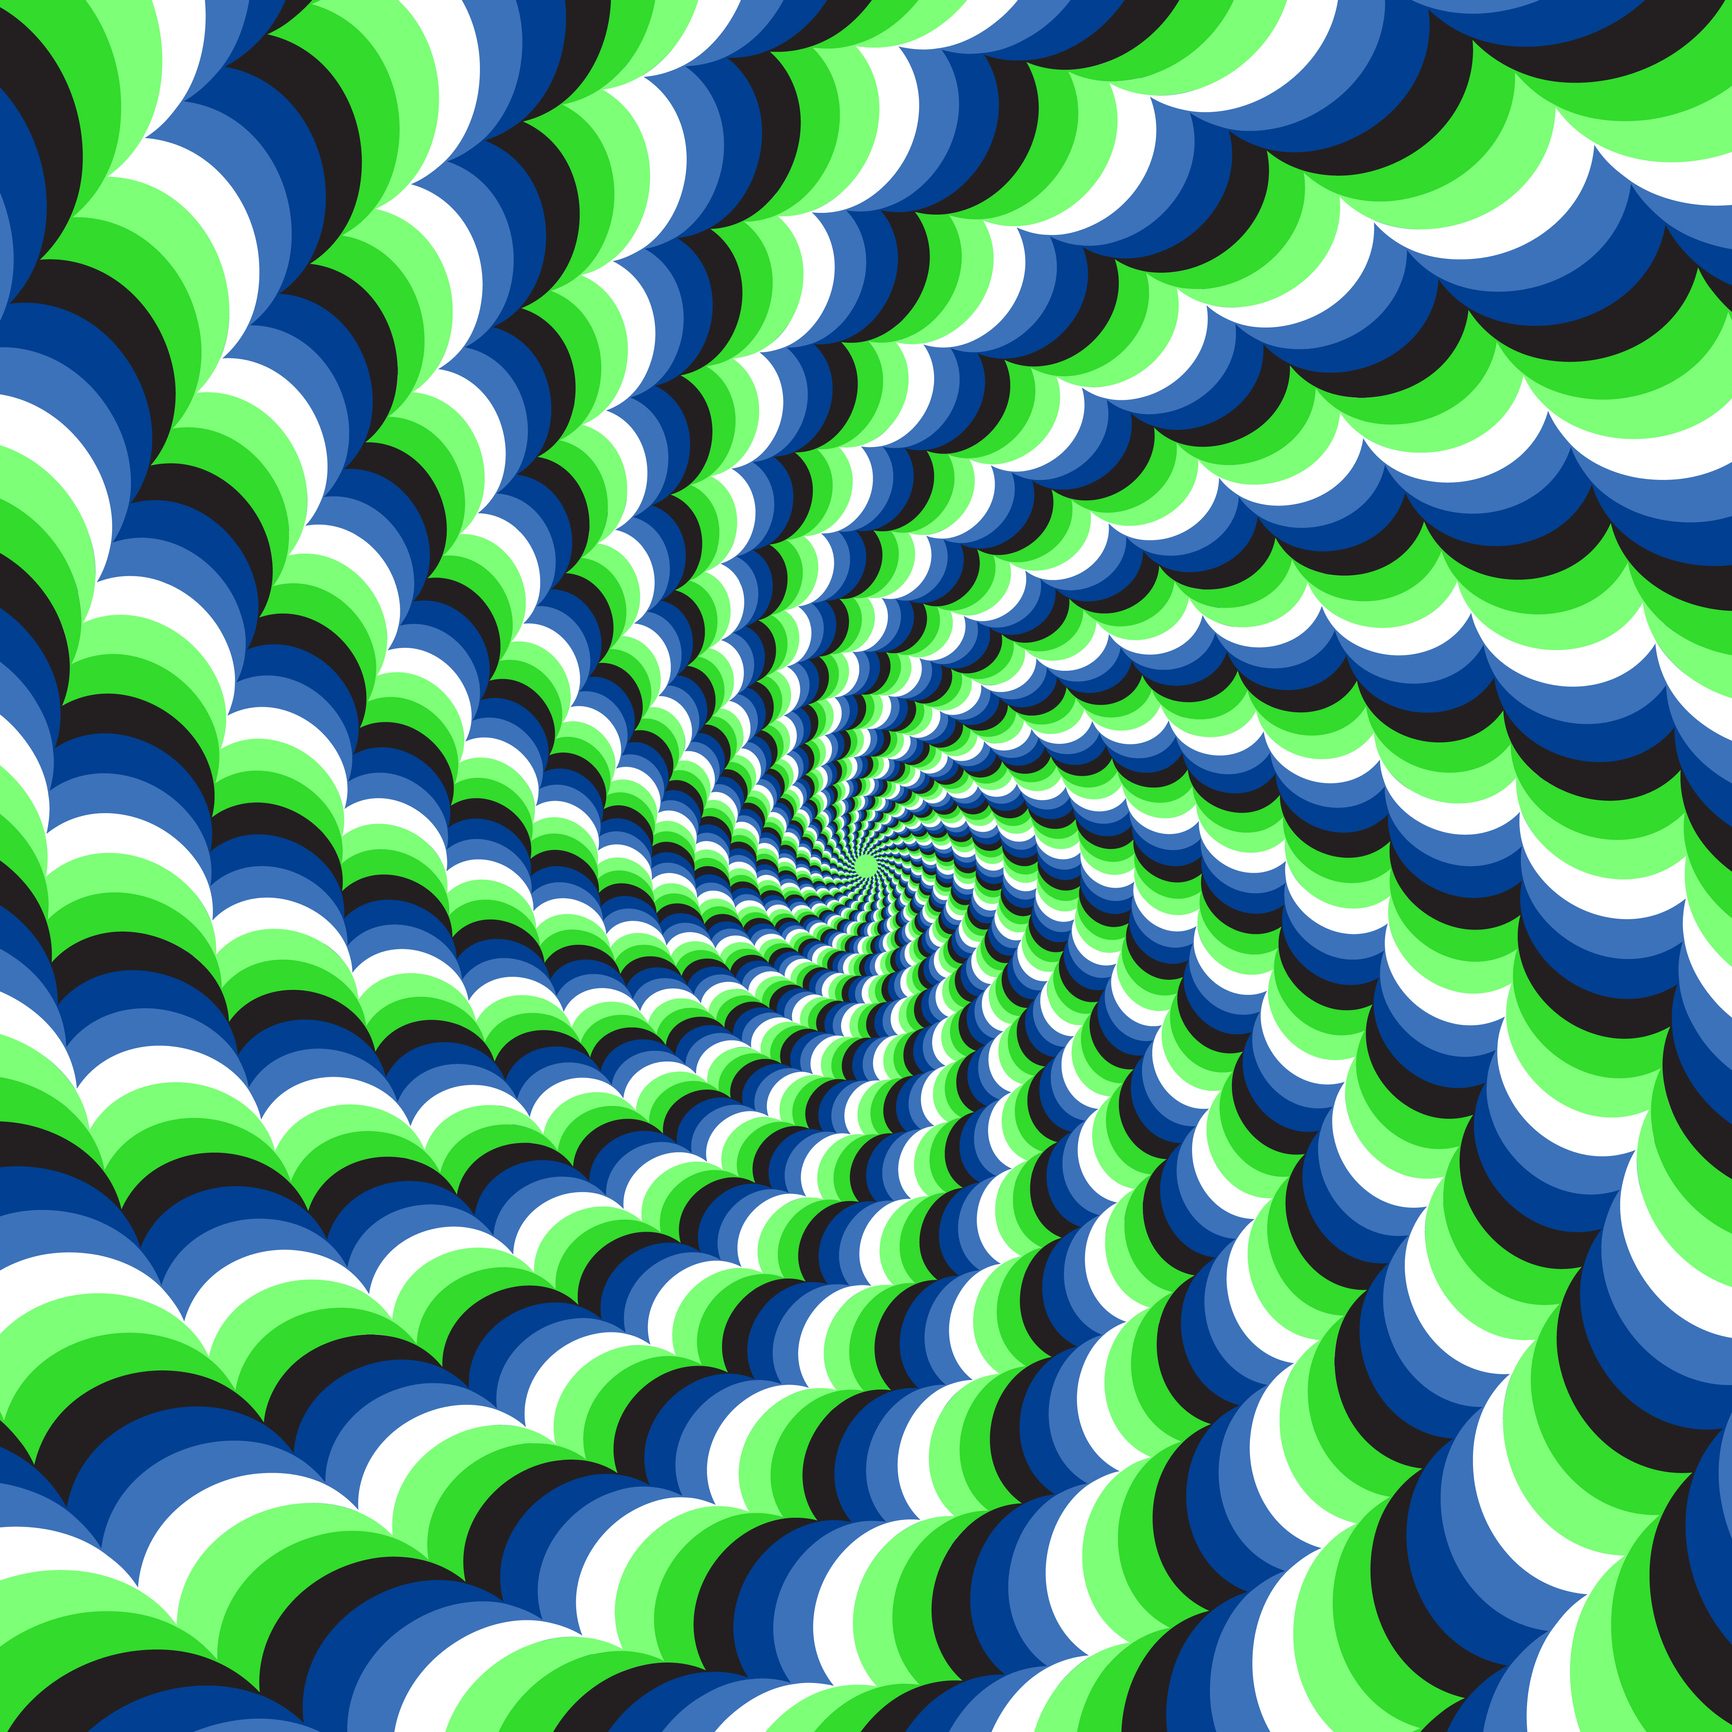 30 Optical Illusions That Will Make Your Brain Hurt | Reader's Digest